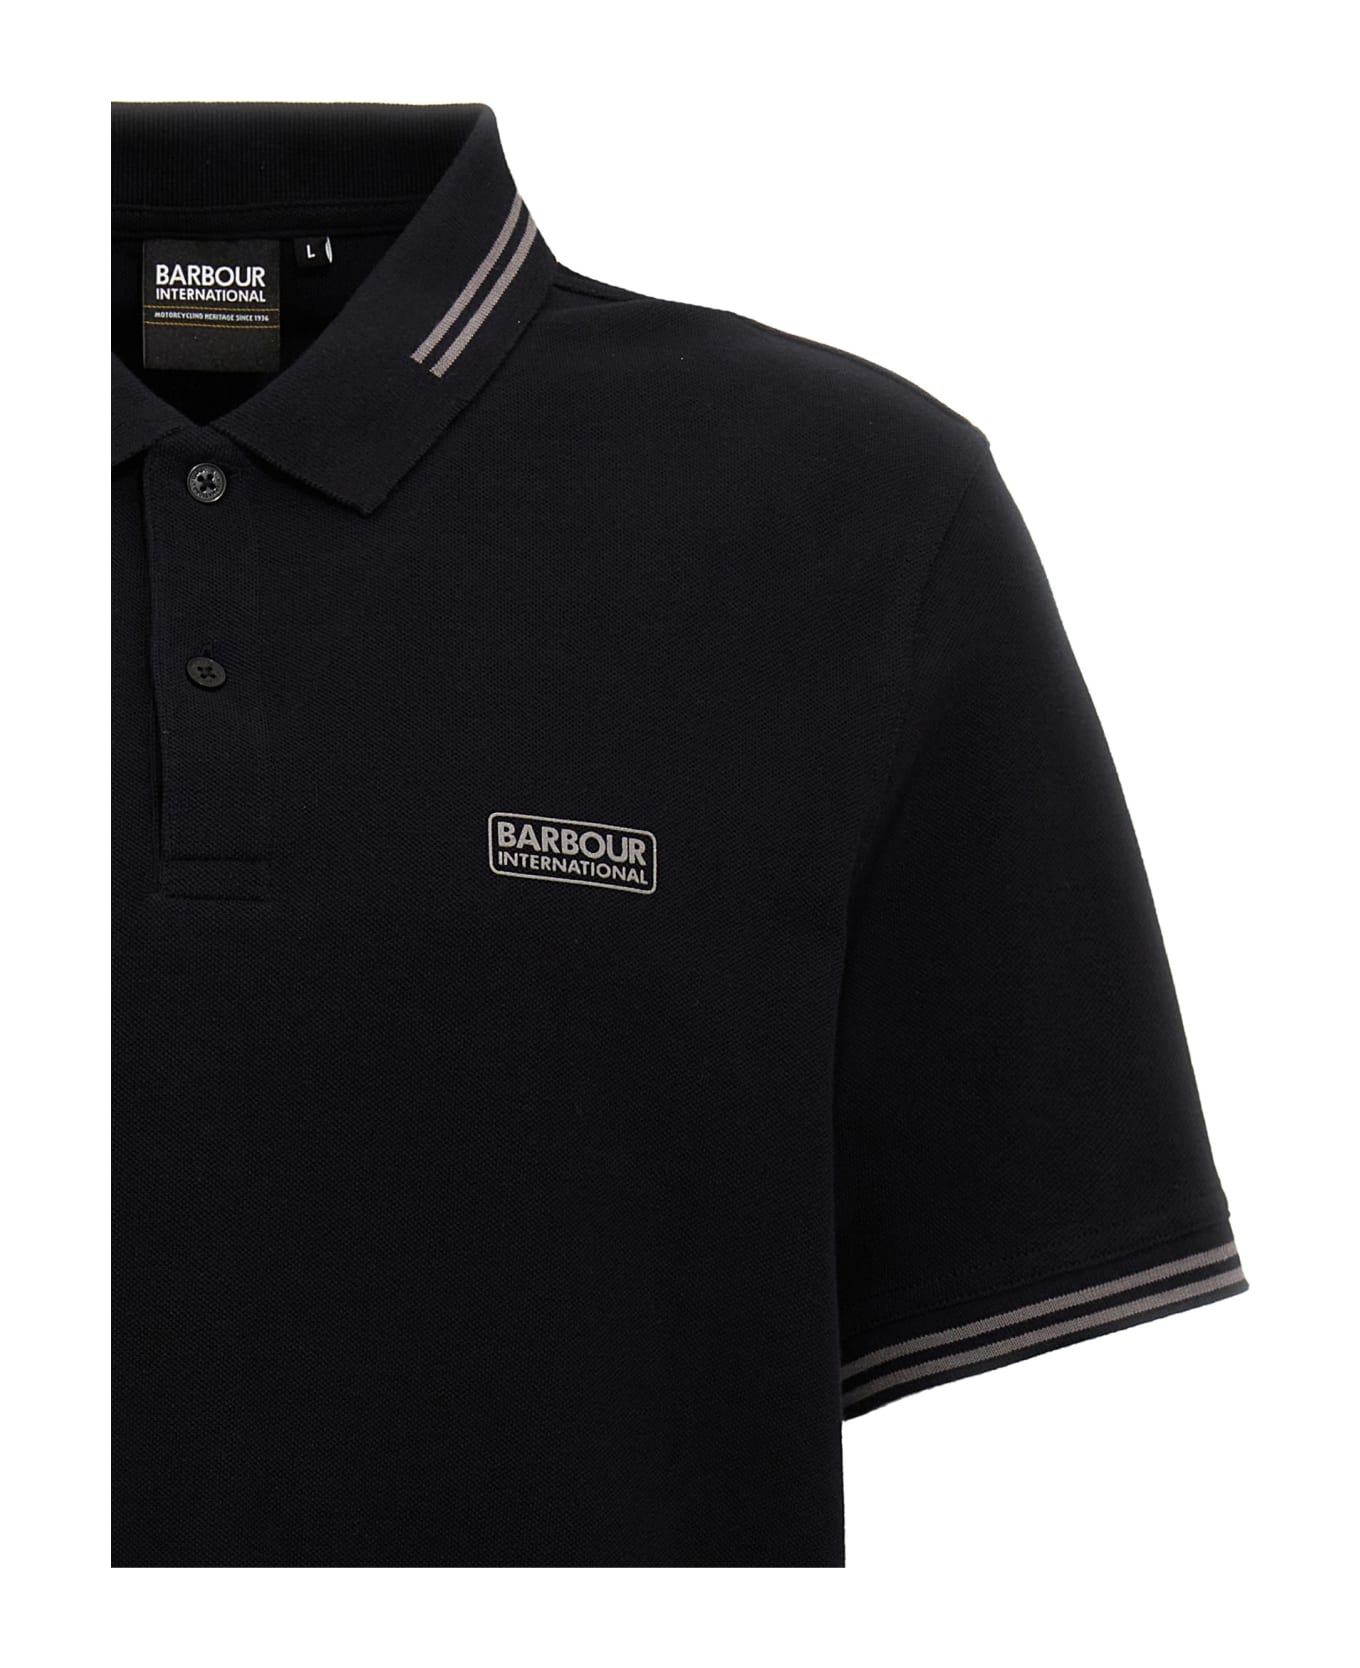 Barbour 'essential Tipped' Polo Shirt - Black   ポロシャツ